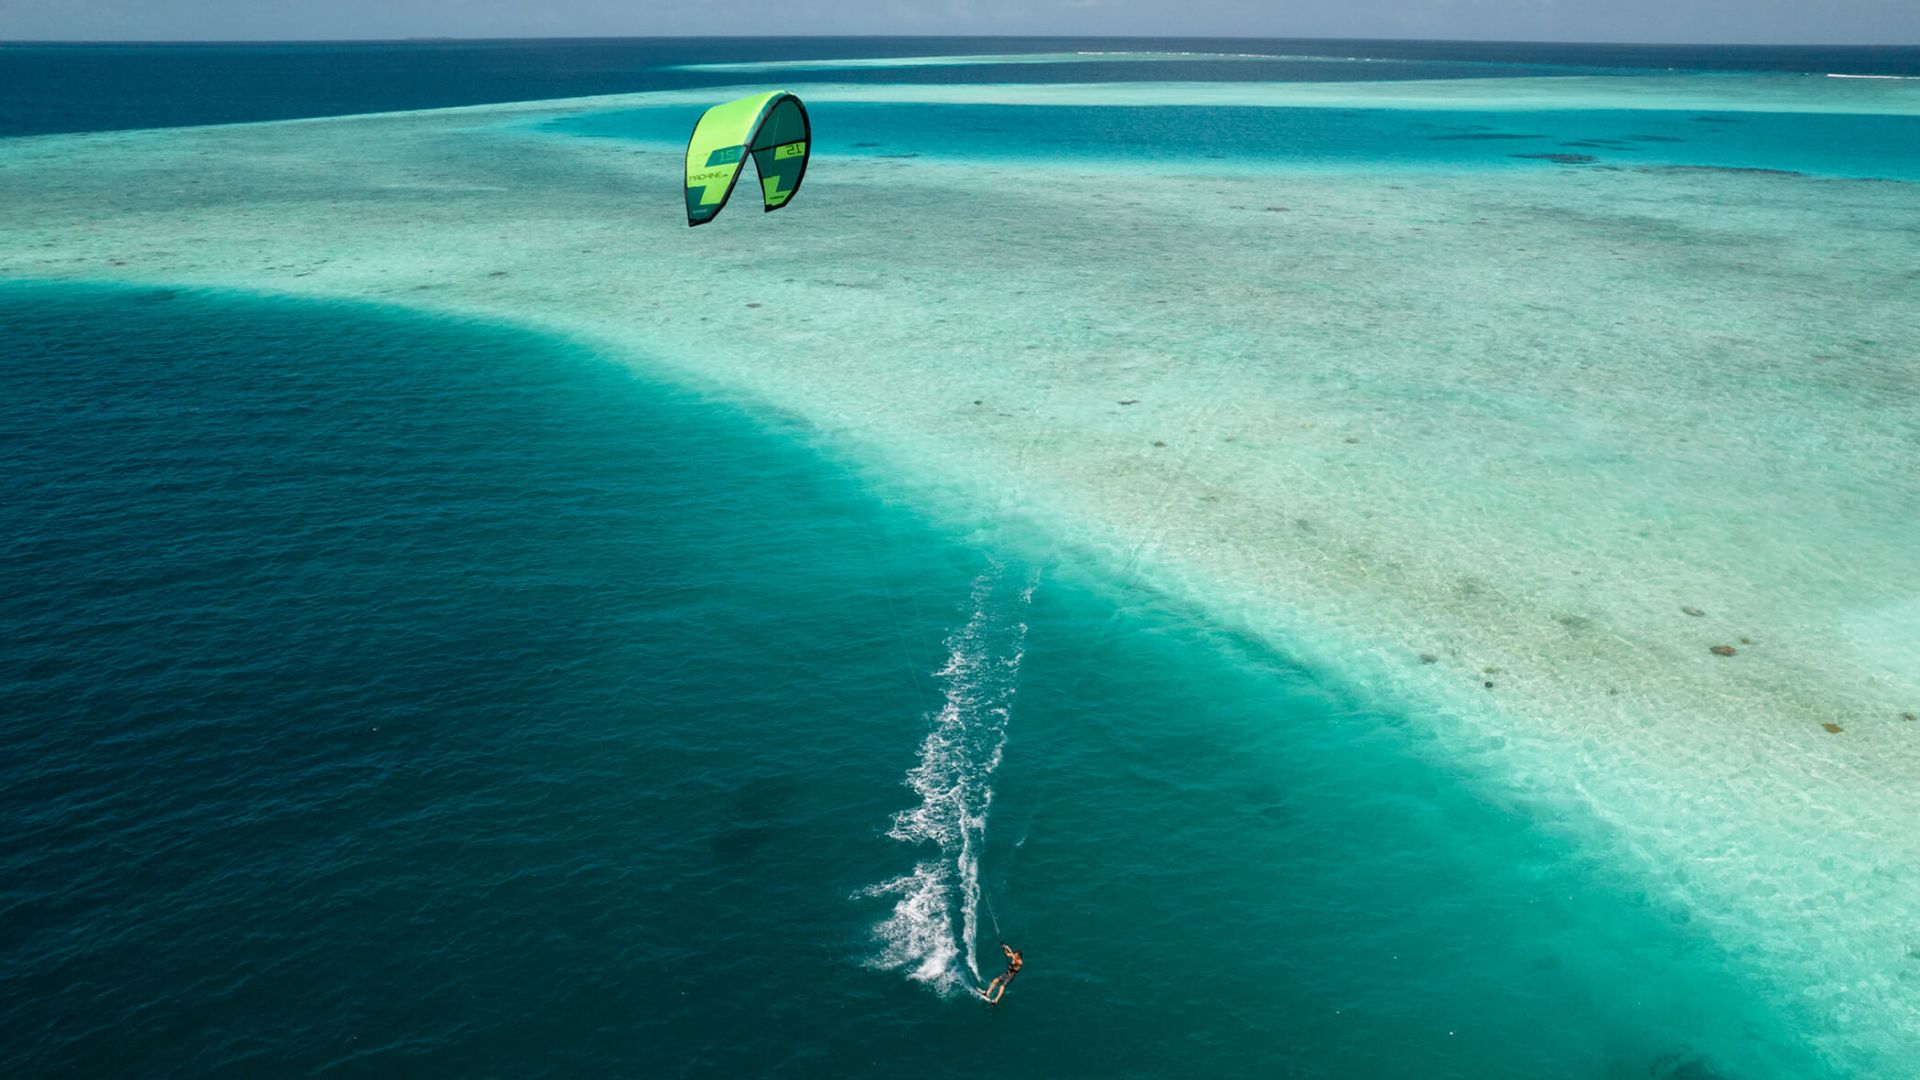 A Person Parasailing On The Ocean